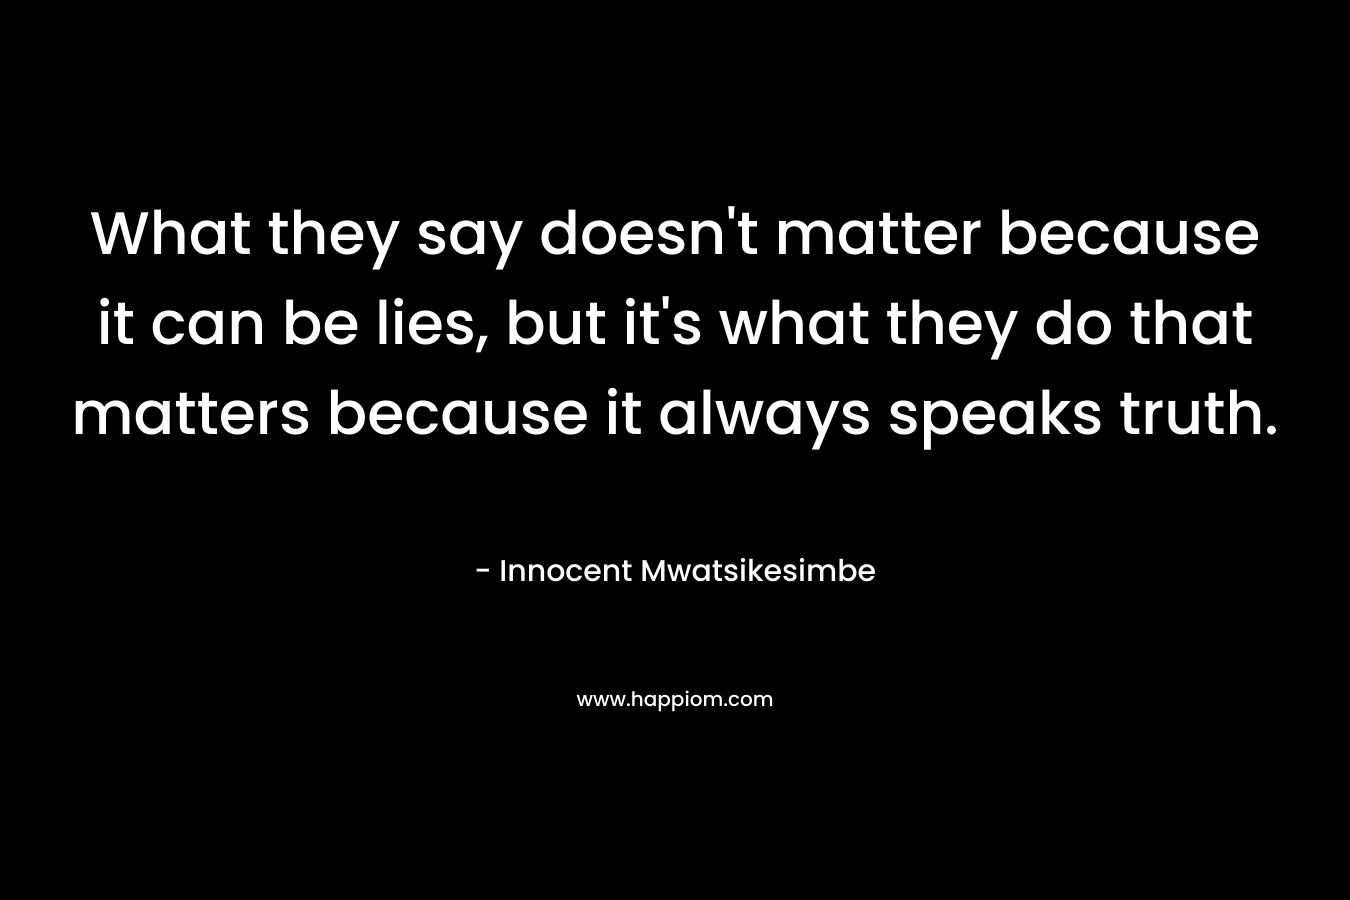 What they say doesn't matter because it can be lies, but it's what they do that matters because it always speaks truth.